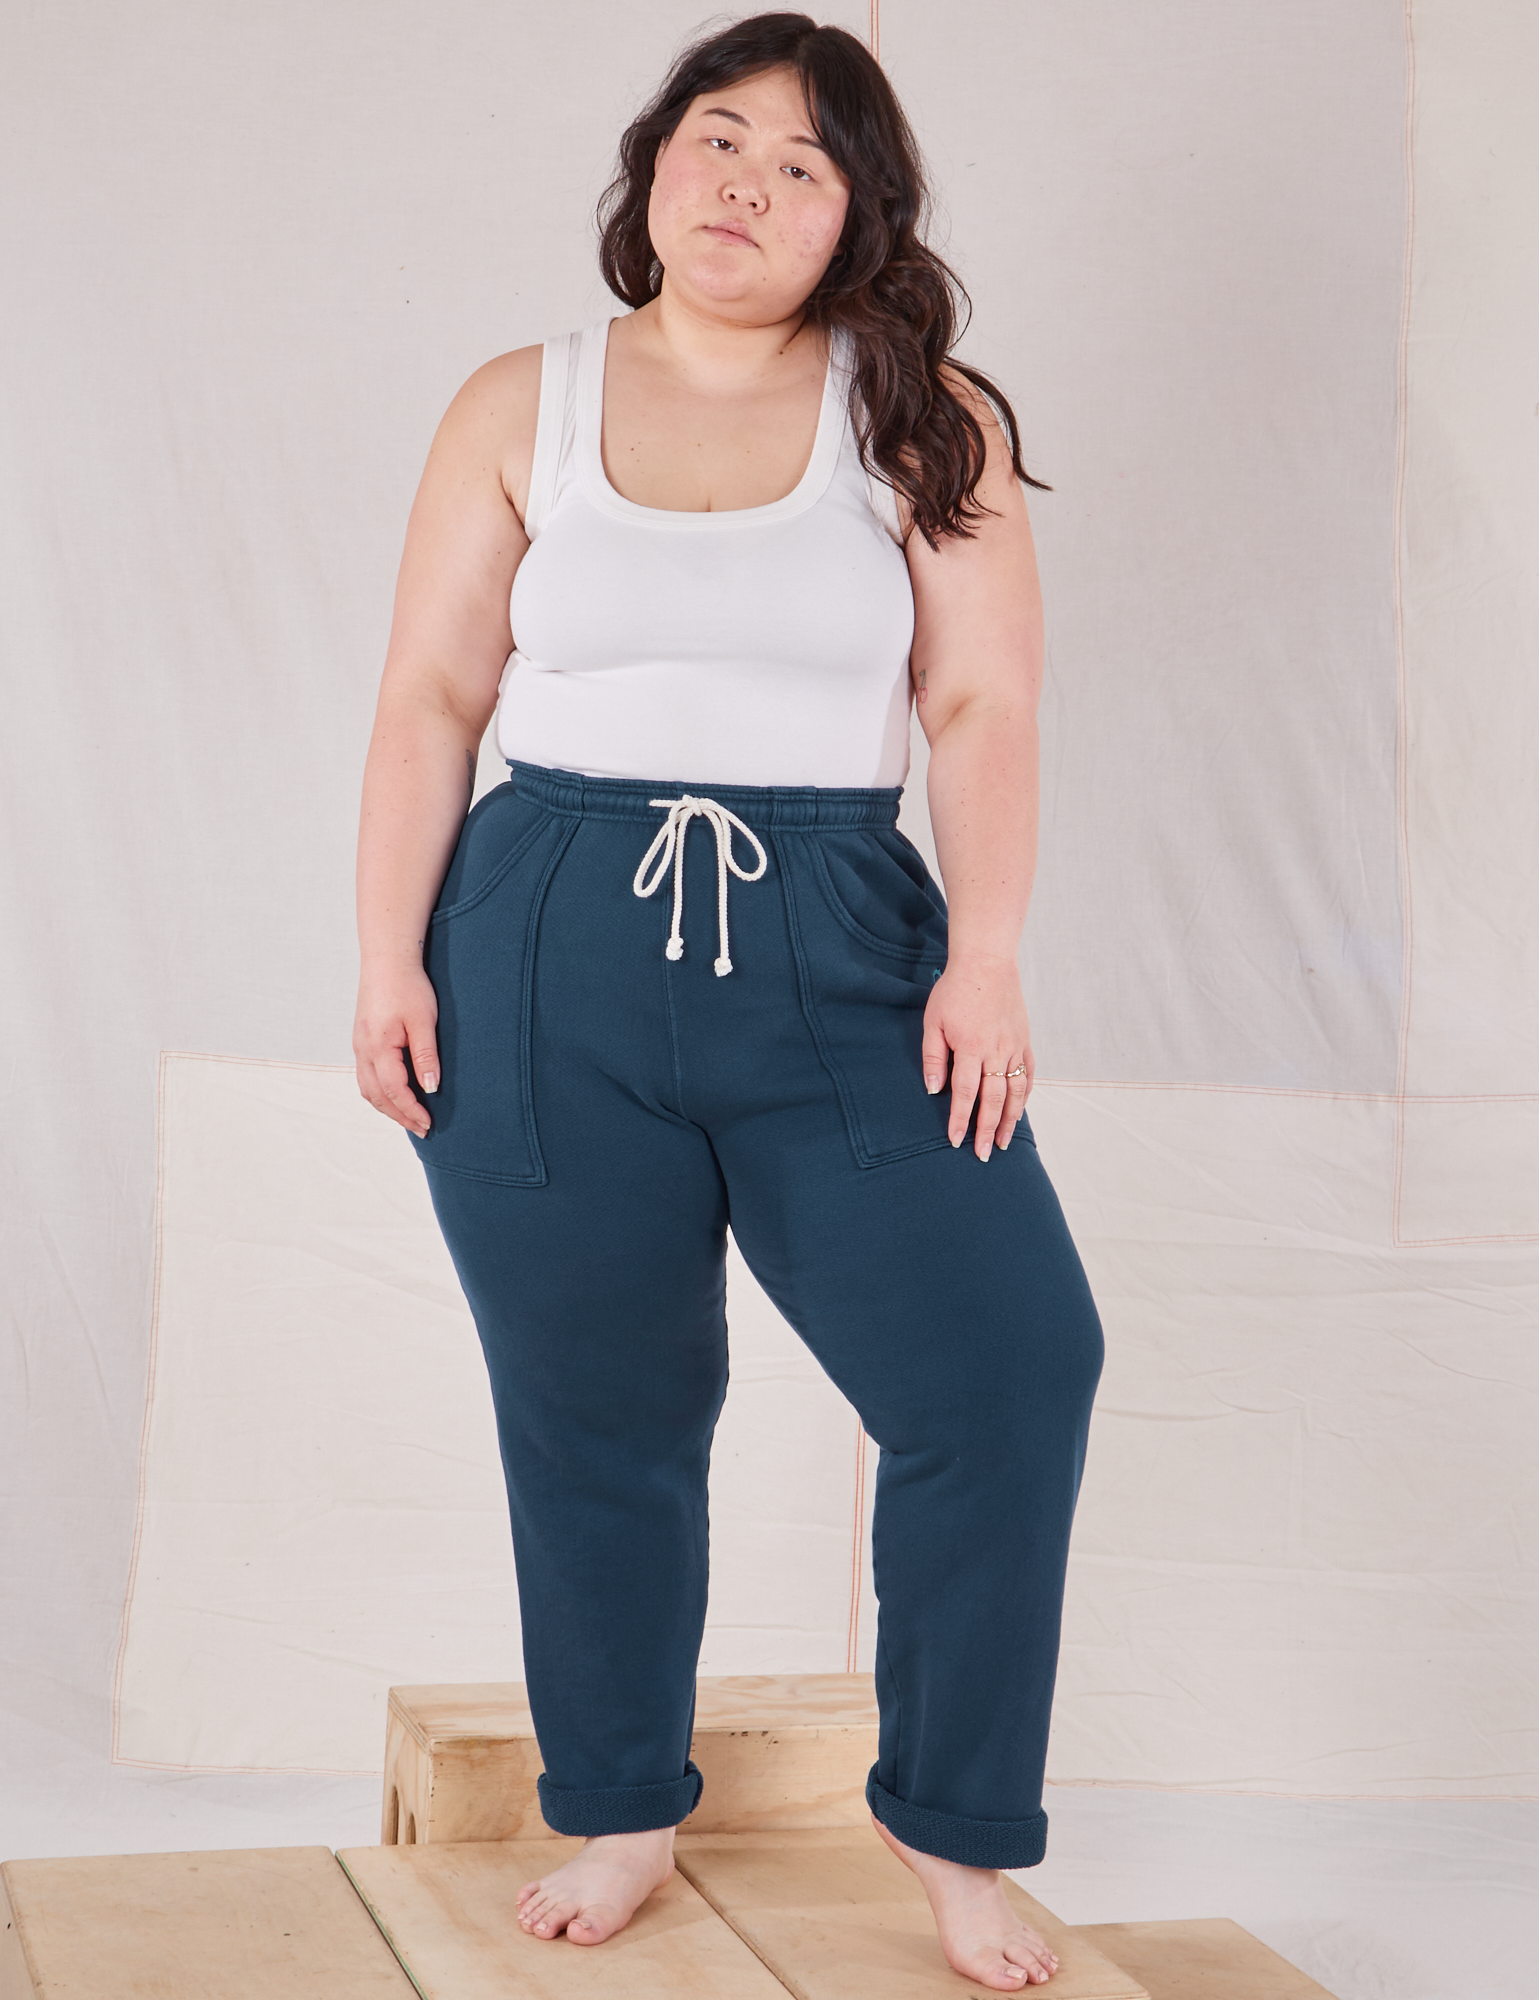 Ashley is 5&#39;7&quot; and wearing L Rolled Cuff Sweat Pants in Lagoon paired with vintage off-white Cropped Tank